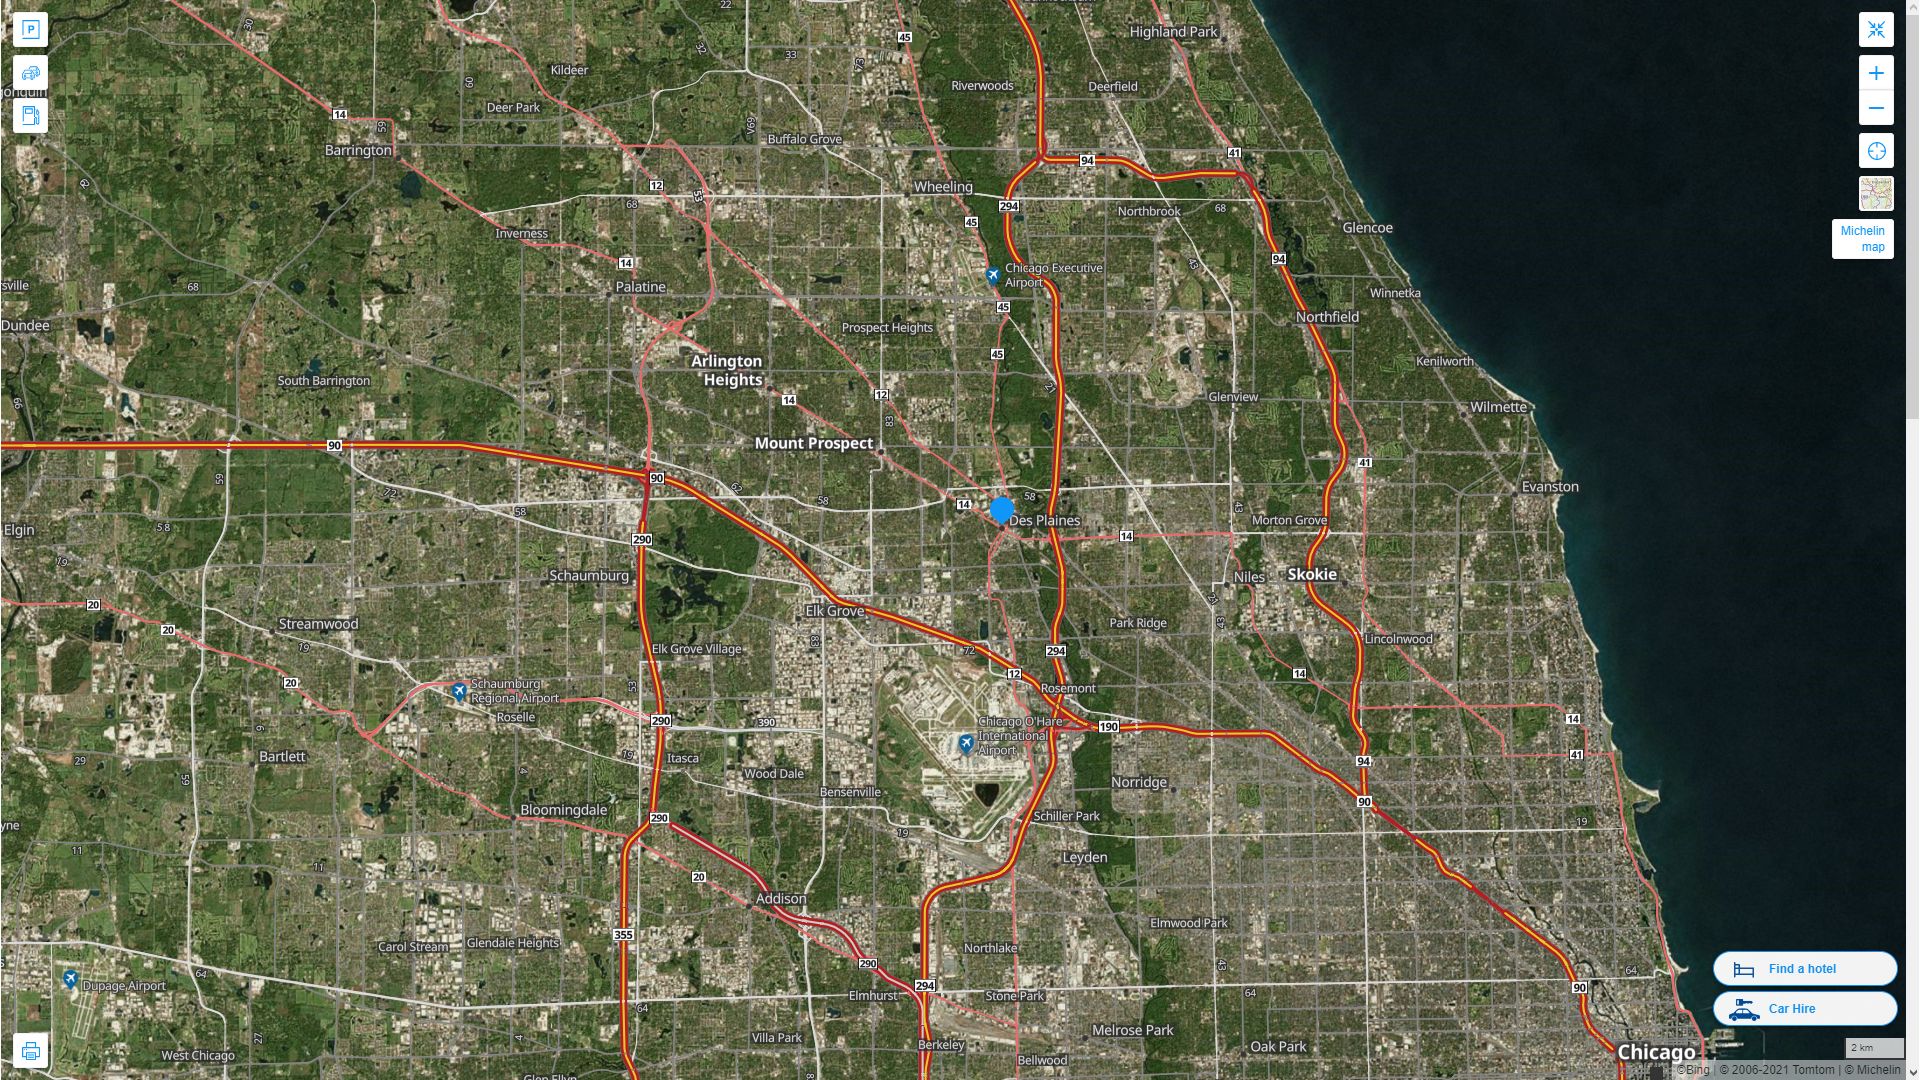 Des Plaines illinois Highway and Road Map with Satellite View